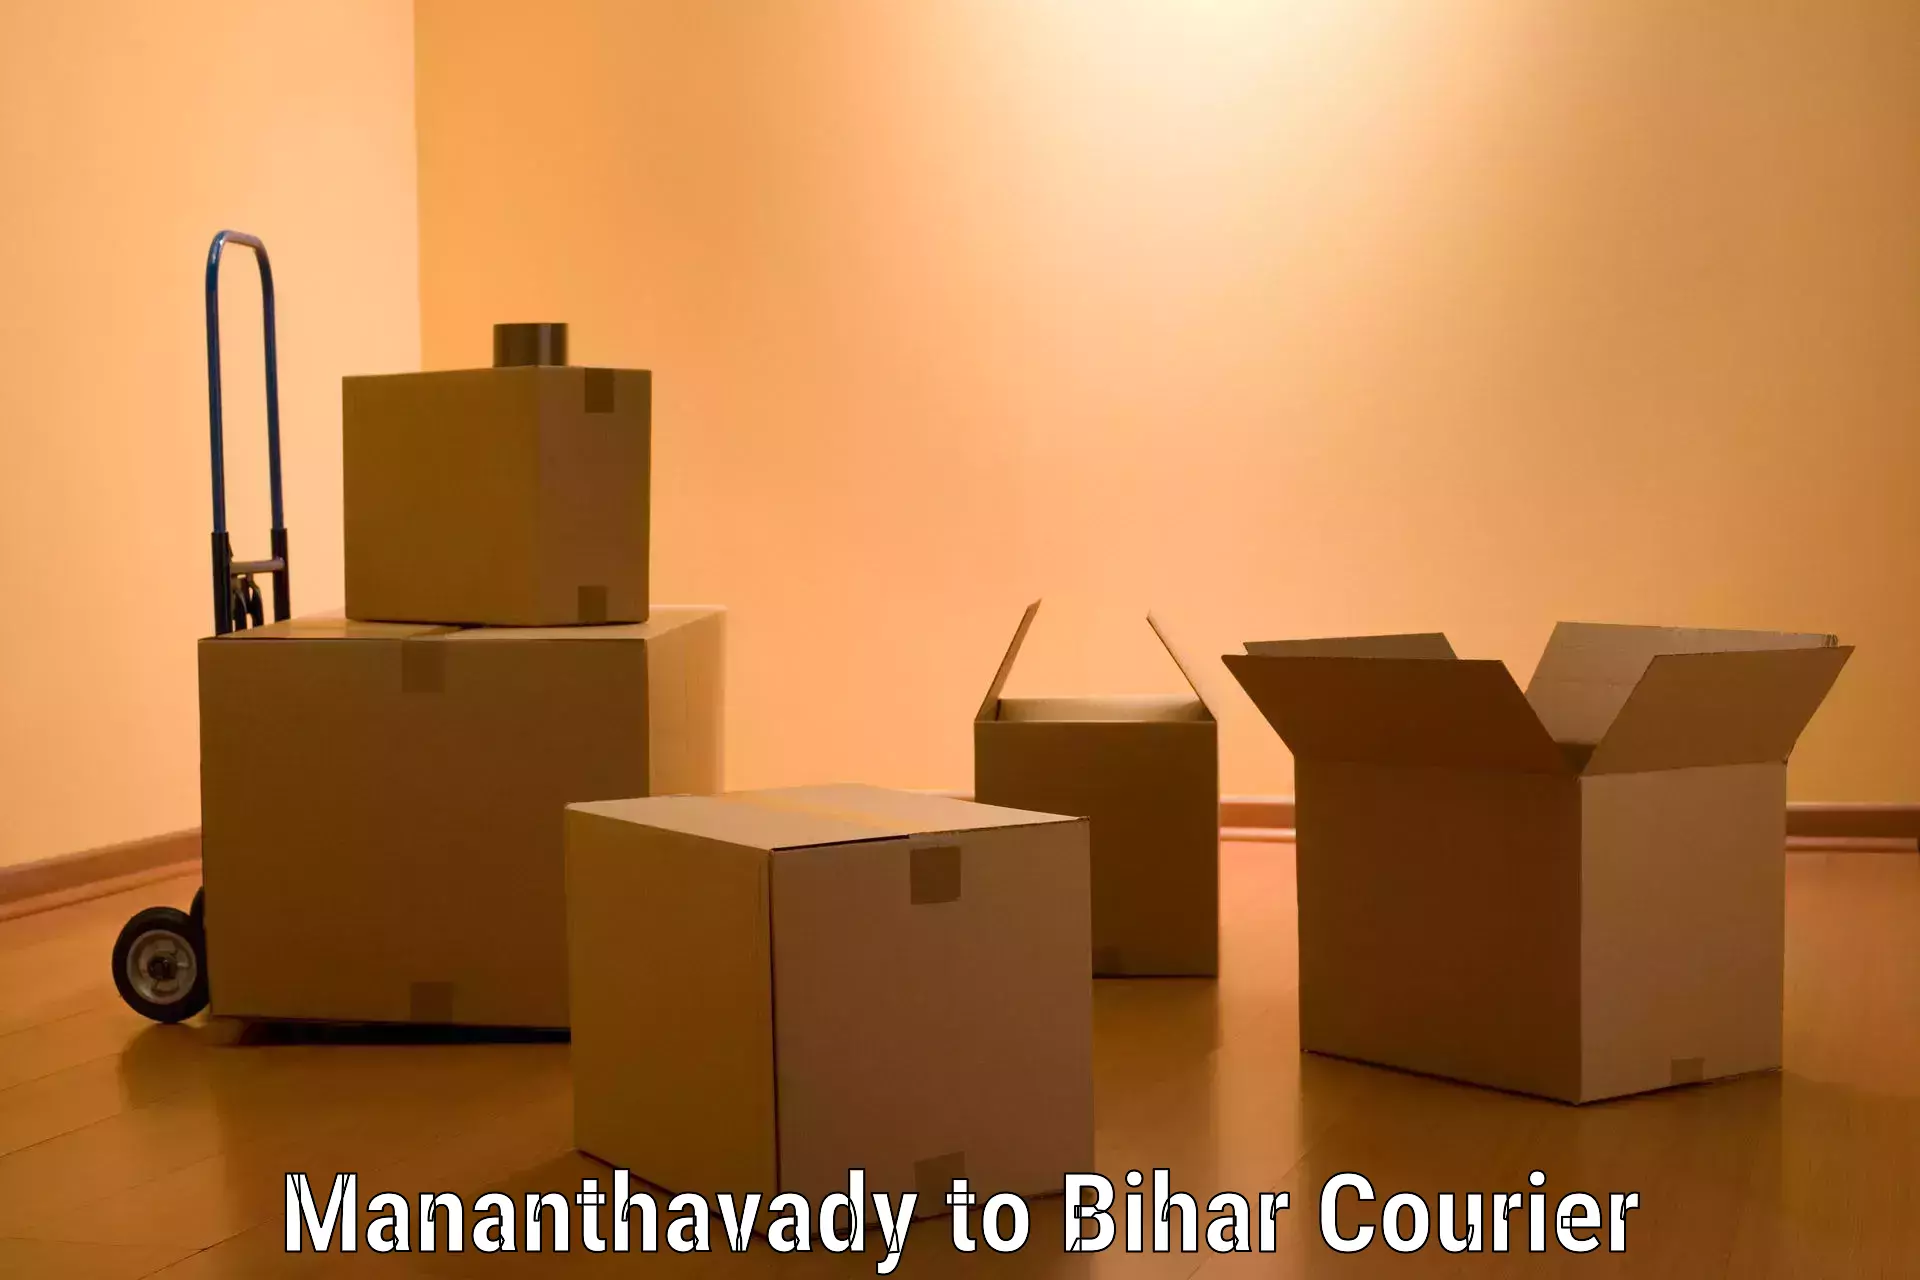 Household goods transport service Mananthavady to Bhojpur